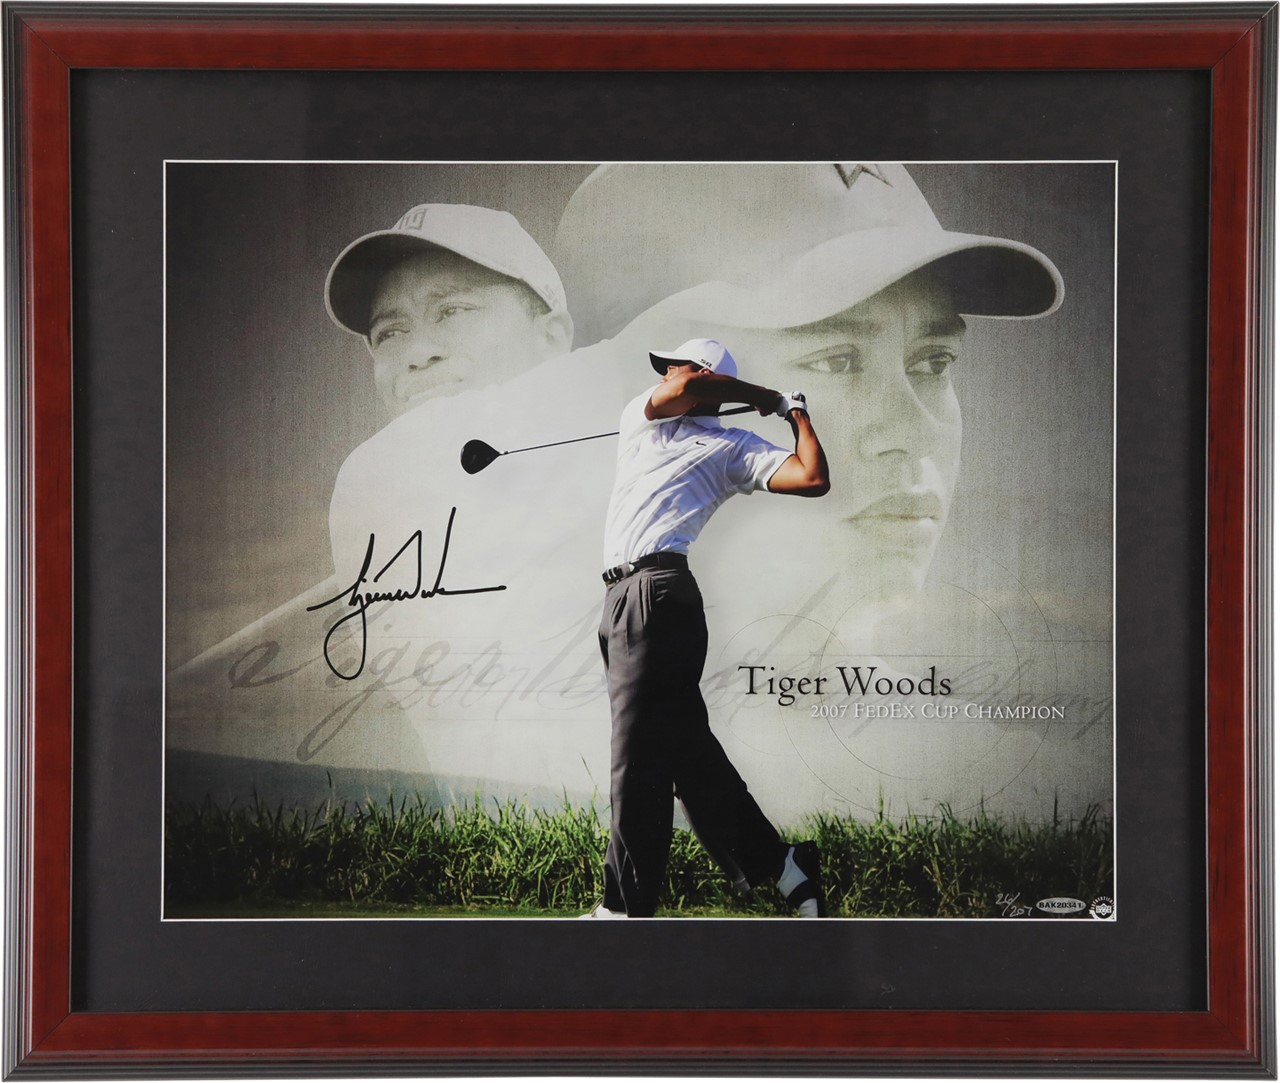 Olympics and All Sports - Tiger Woods 2007 FedEx Cup Champion Oversized Limited Edition Signed Photograph 26/207 (UDA)